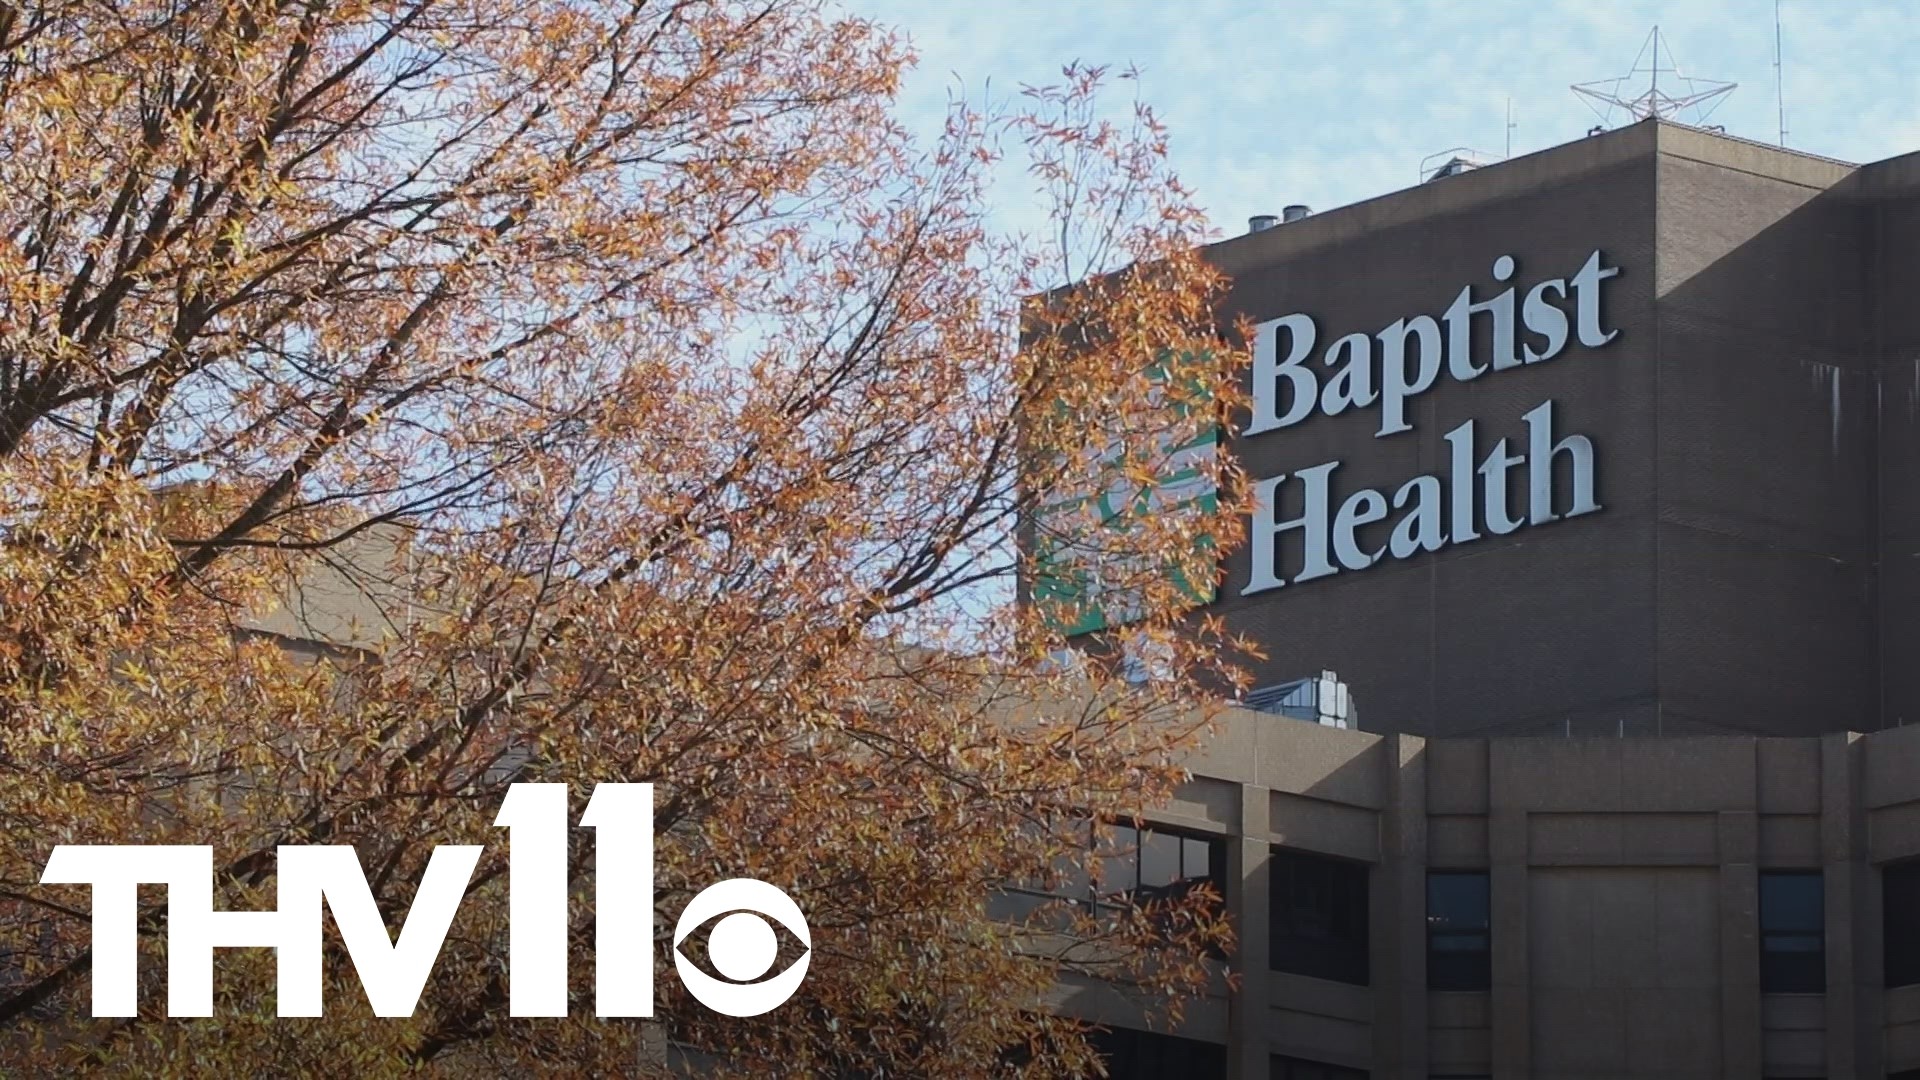 A disagreement of medical insurance coverage could impact thousands of Arkansas families as it could lead to many being out of network at Baptist Health locations.